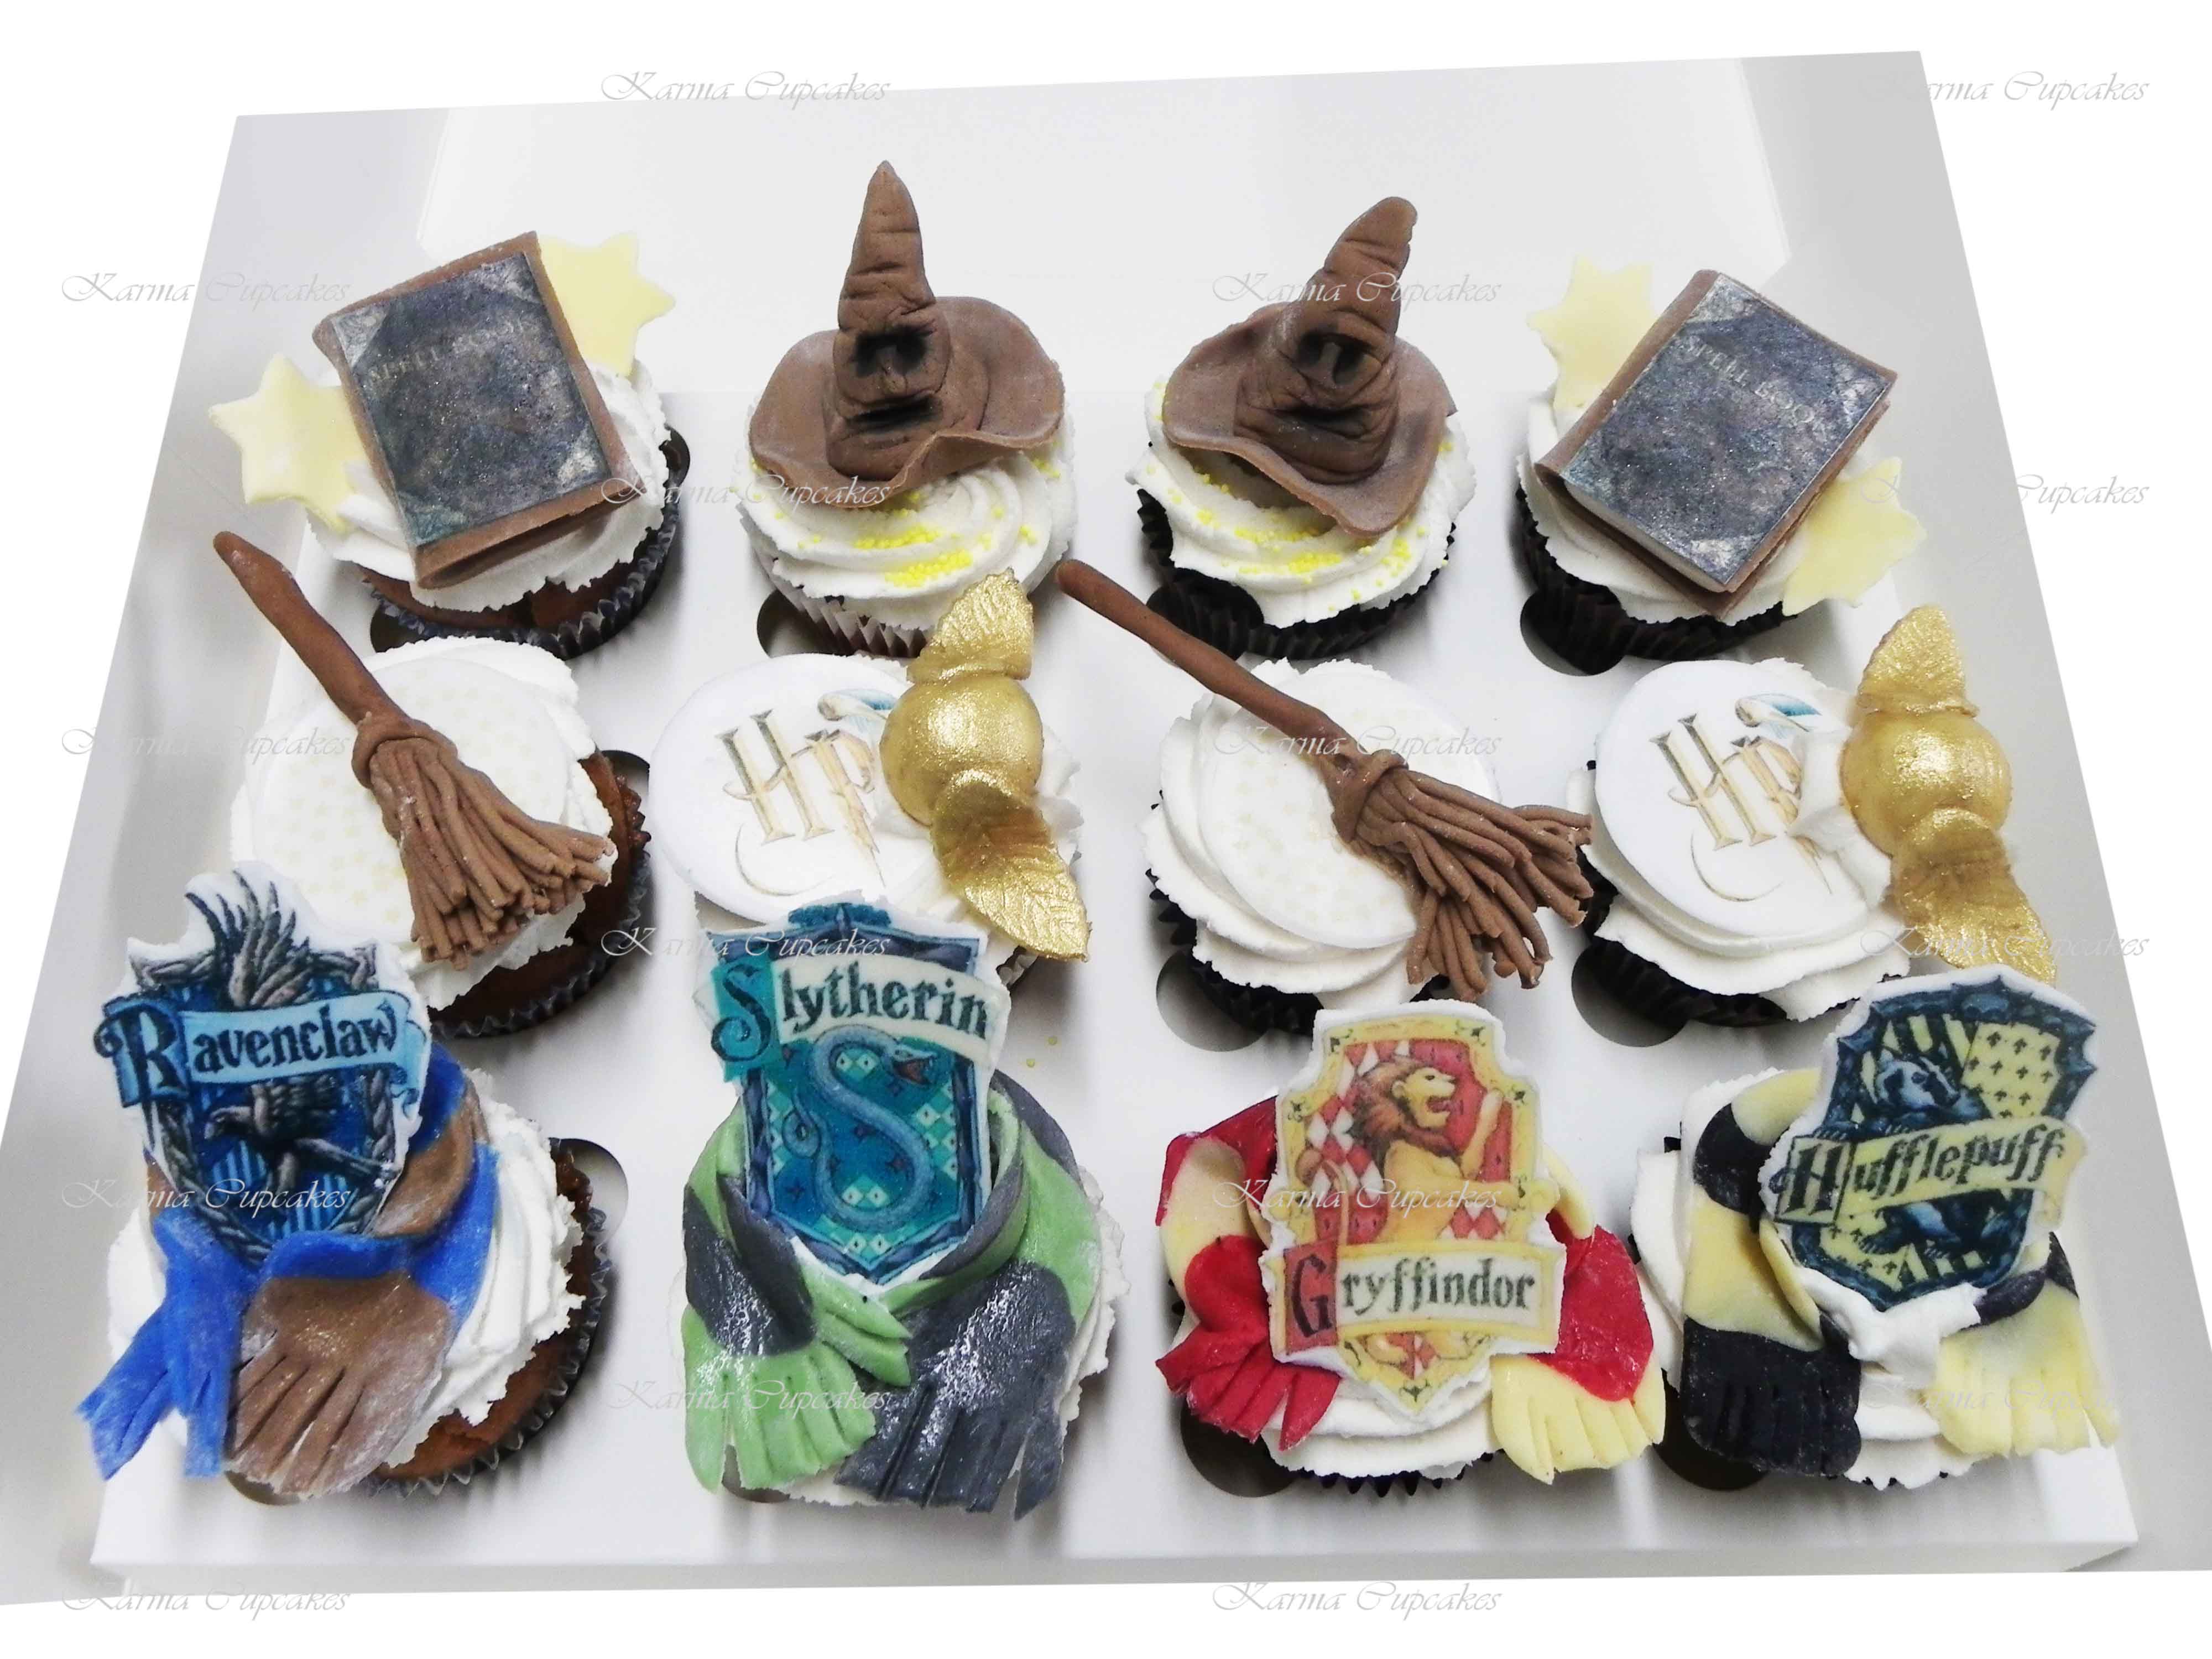 Harry Potter Cupcakes